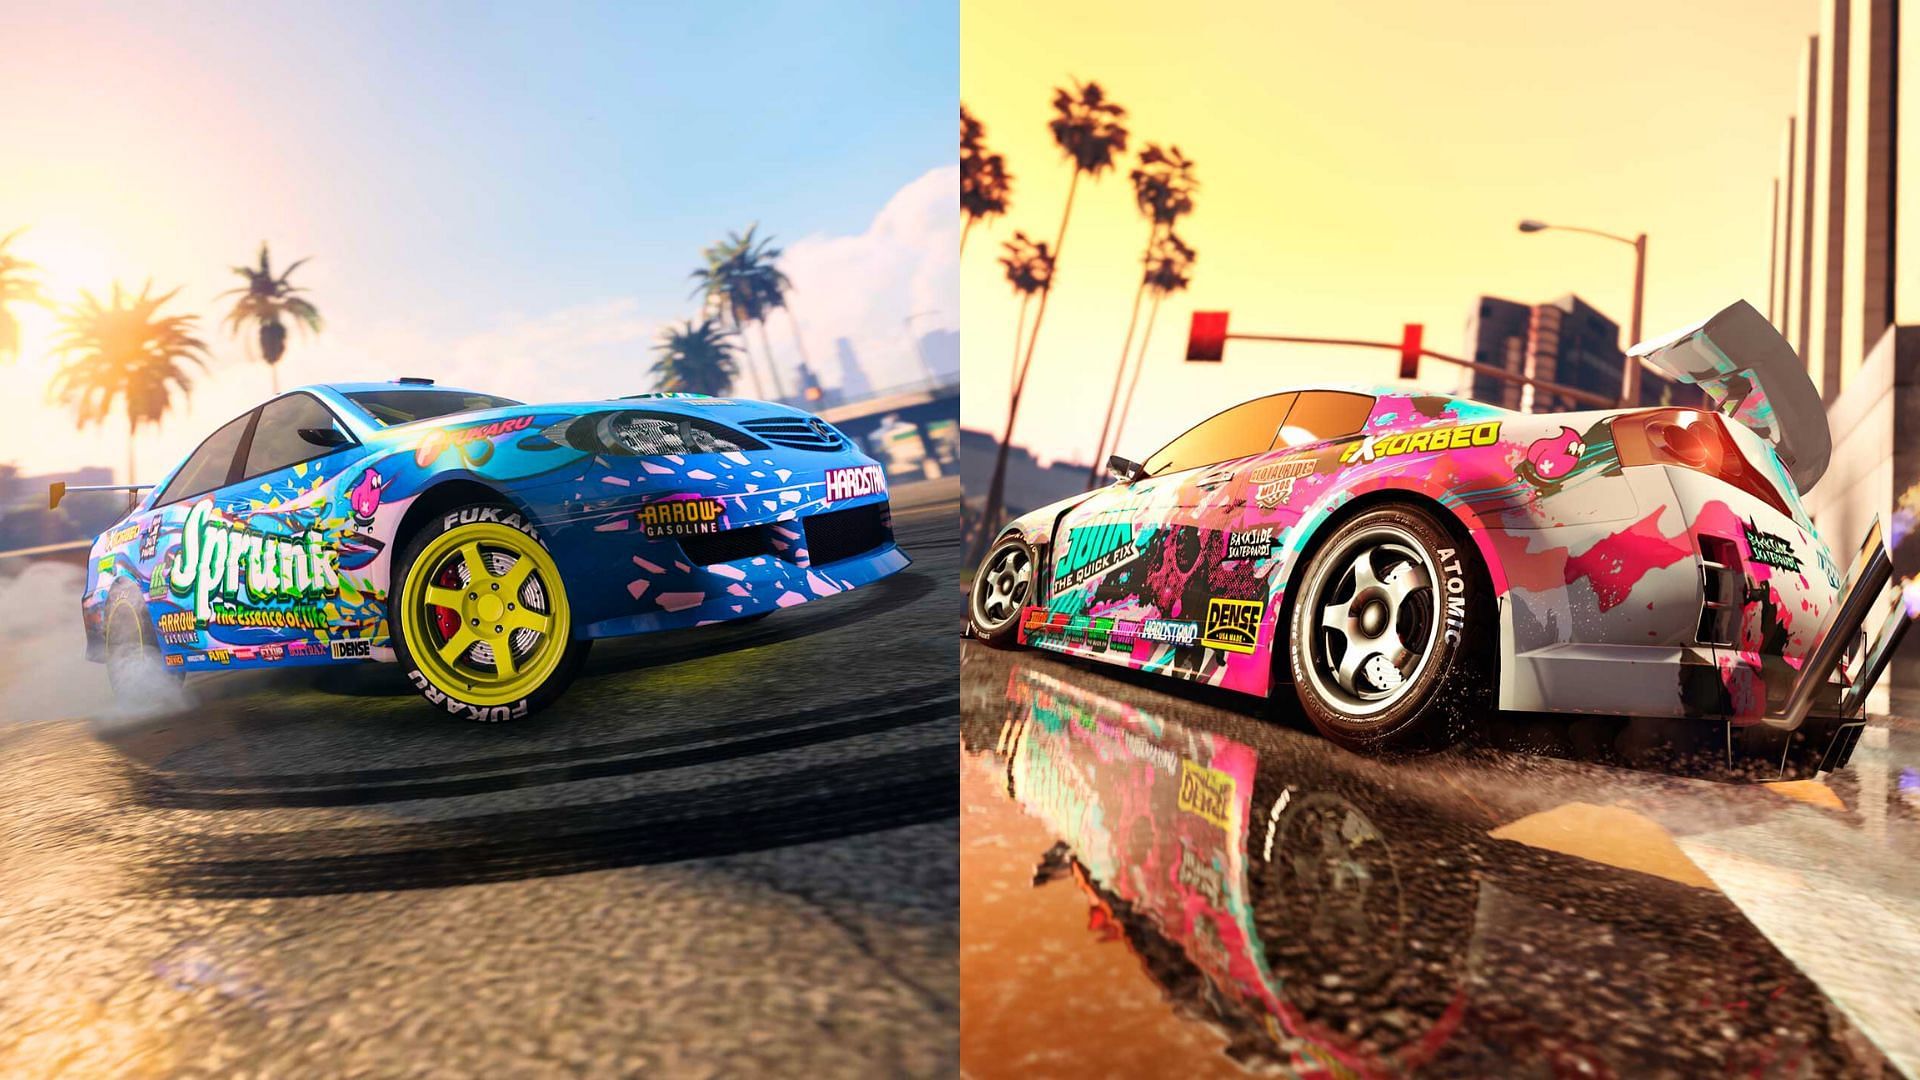 A brief report on the newly researched catch-up race modes after the GTA Online weekly update (Image via Rockstar Games)